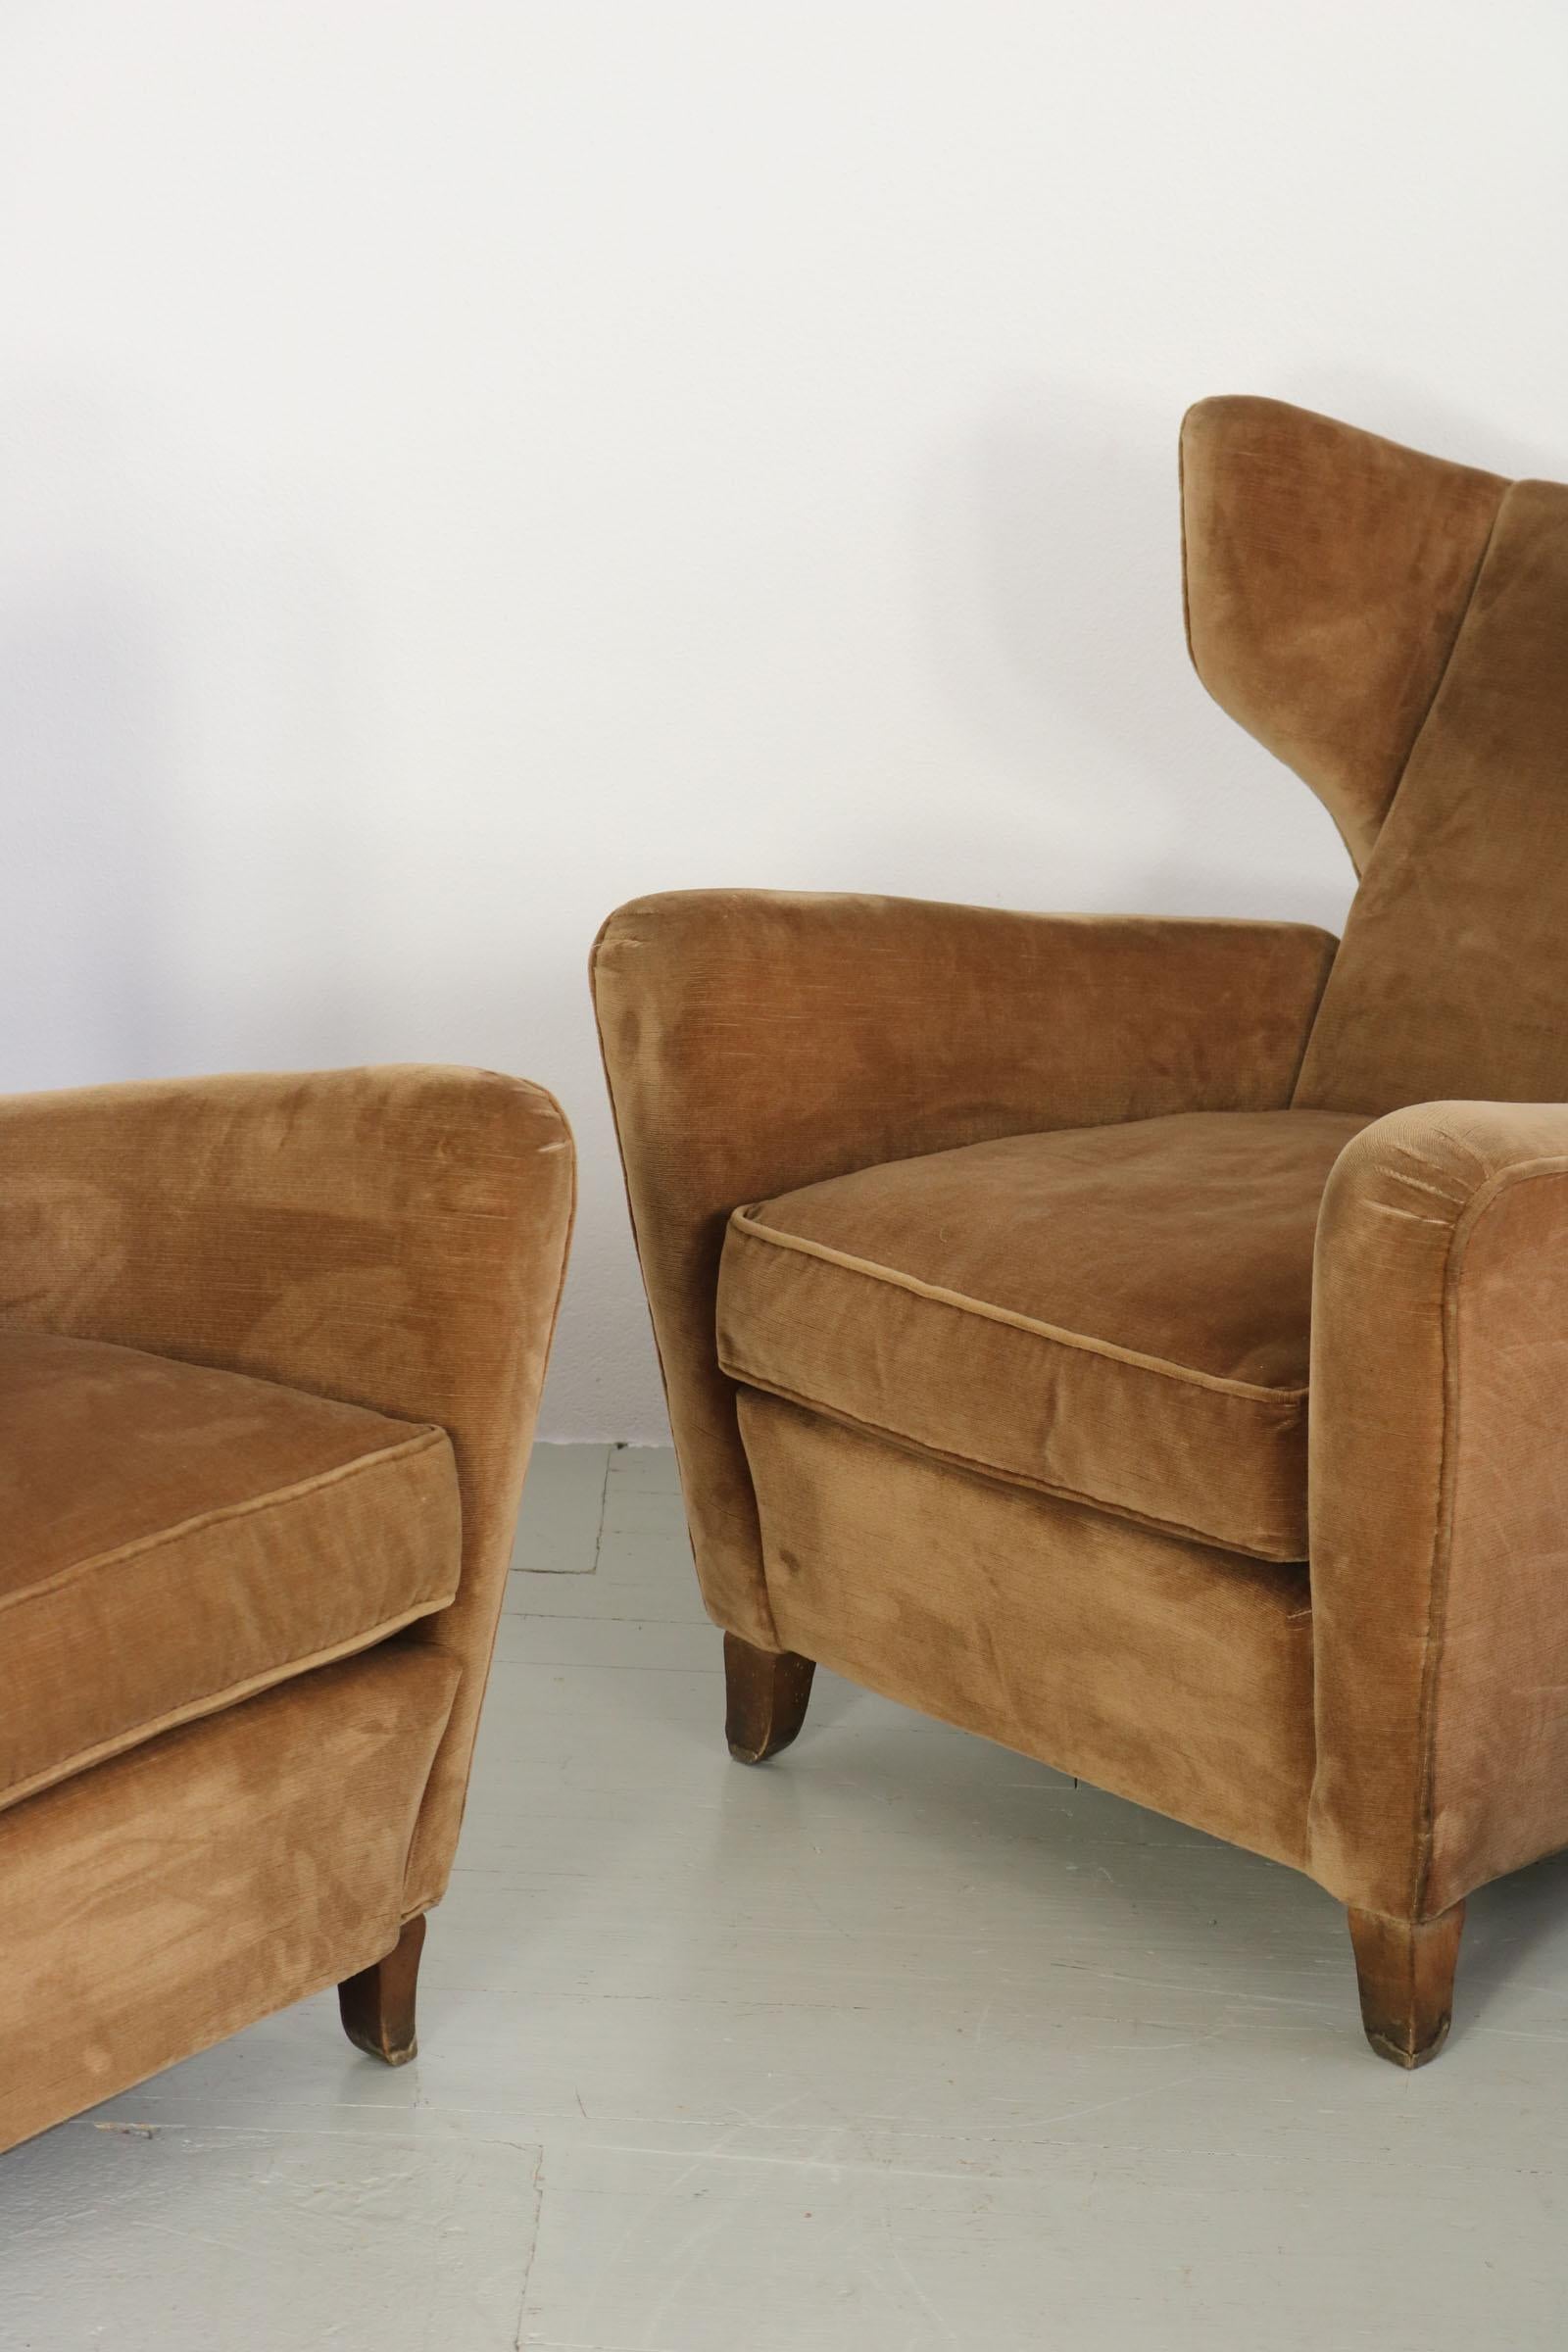 Set of Three Velvet Armchair, Melchiorre Bega Attributed, Italy, 1950s For Sale 10